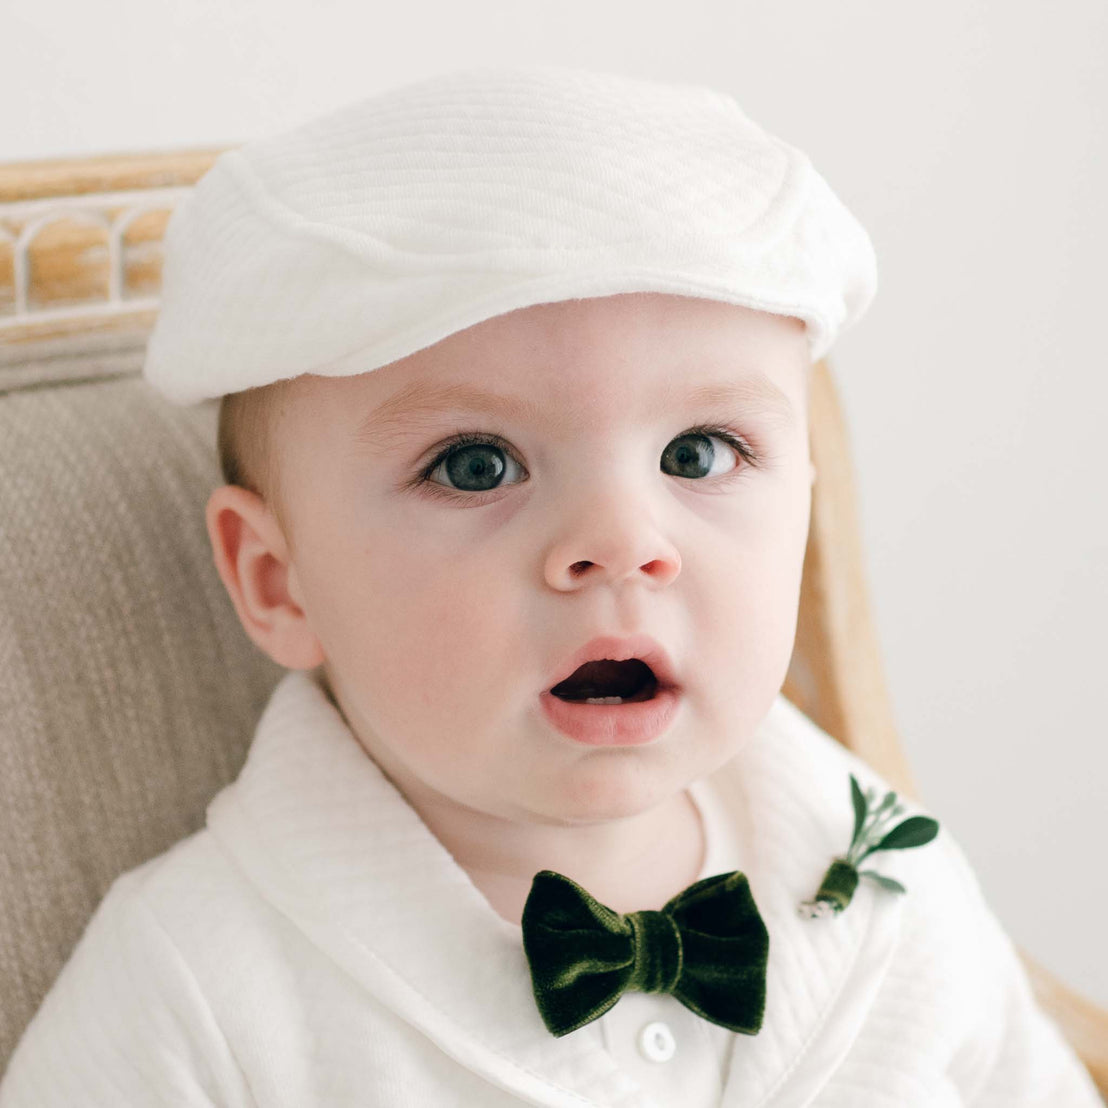 A portrait of a baby with wide blue eyes, dressed in a white outfit with a Noah Green Bow Tie & Boutonniere for a christening, sitting in front of a light background.